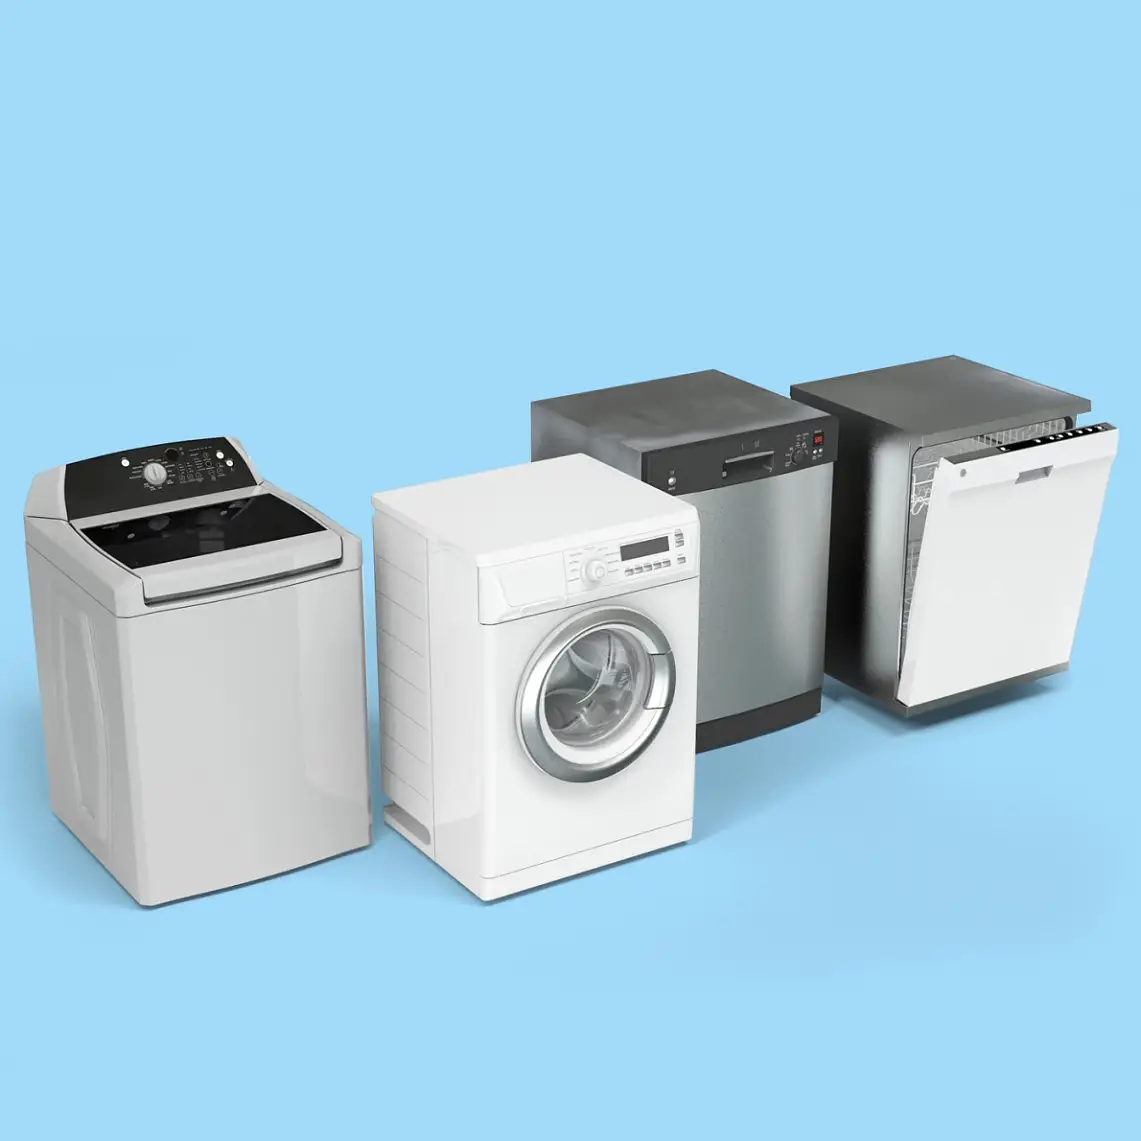 Tape can be used for a wide range of applications for laundry and cleaning appliances.